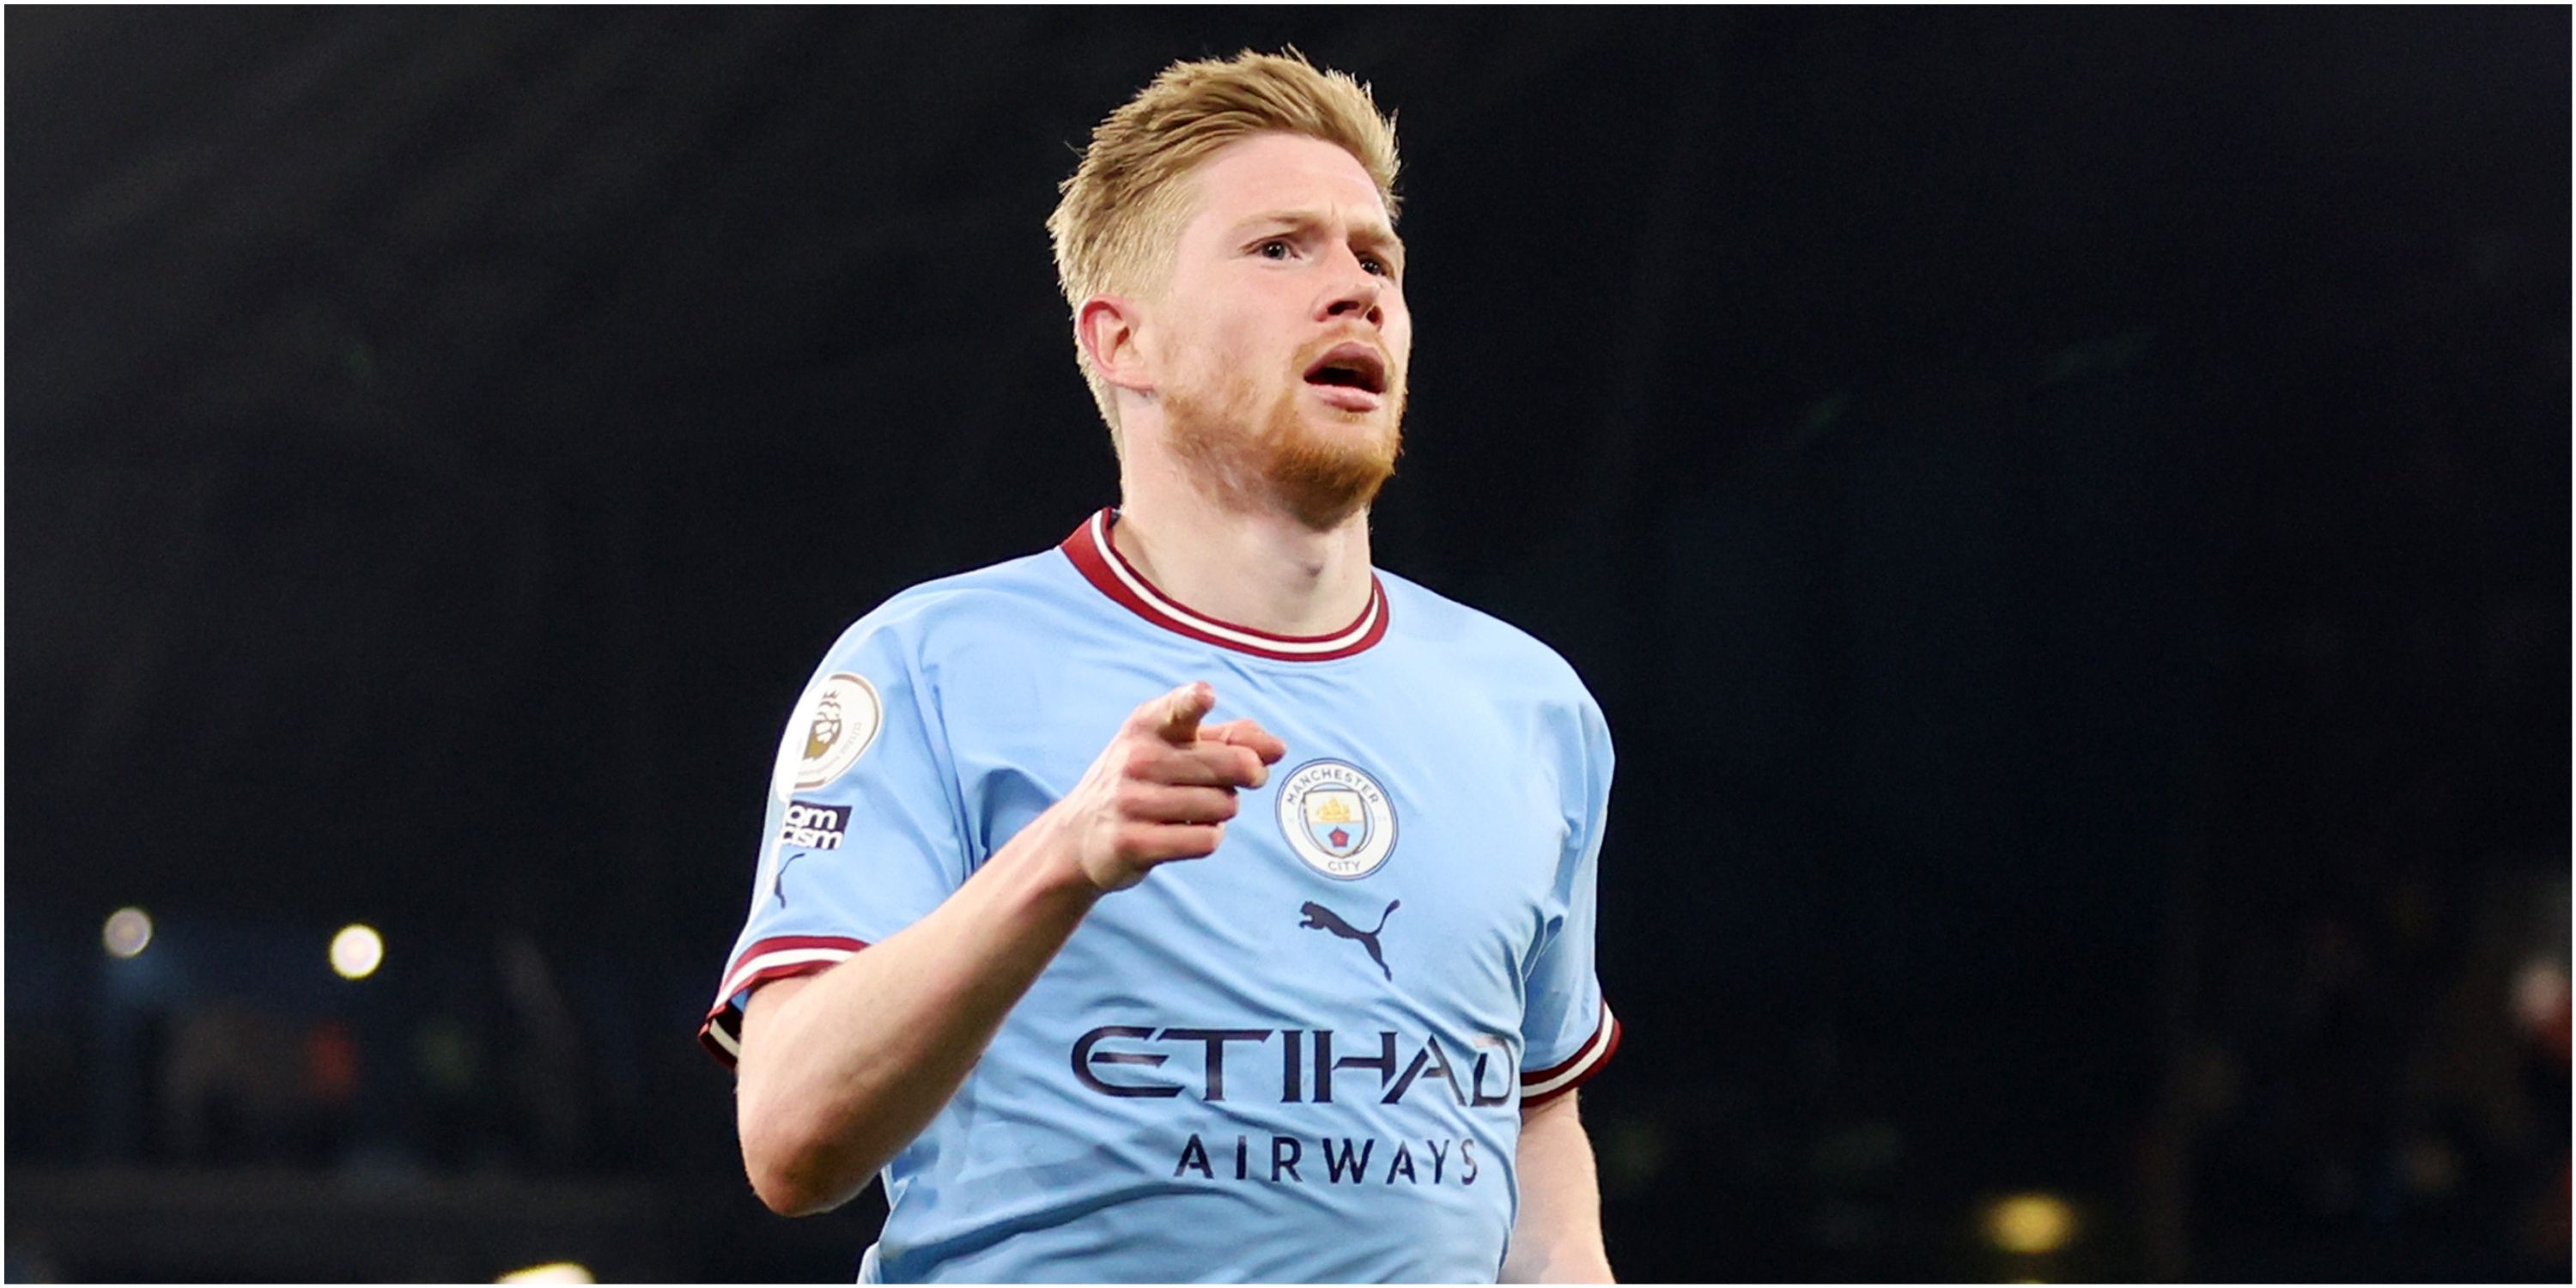 De Bruyne celebrates during Man City's 4-1 win over Arsenal